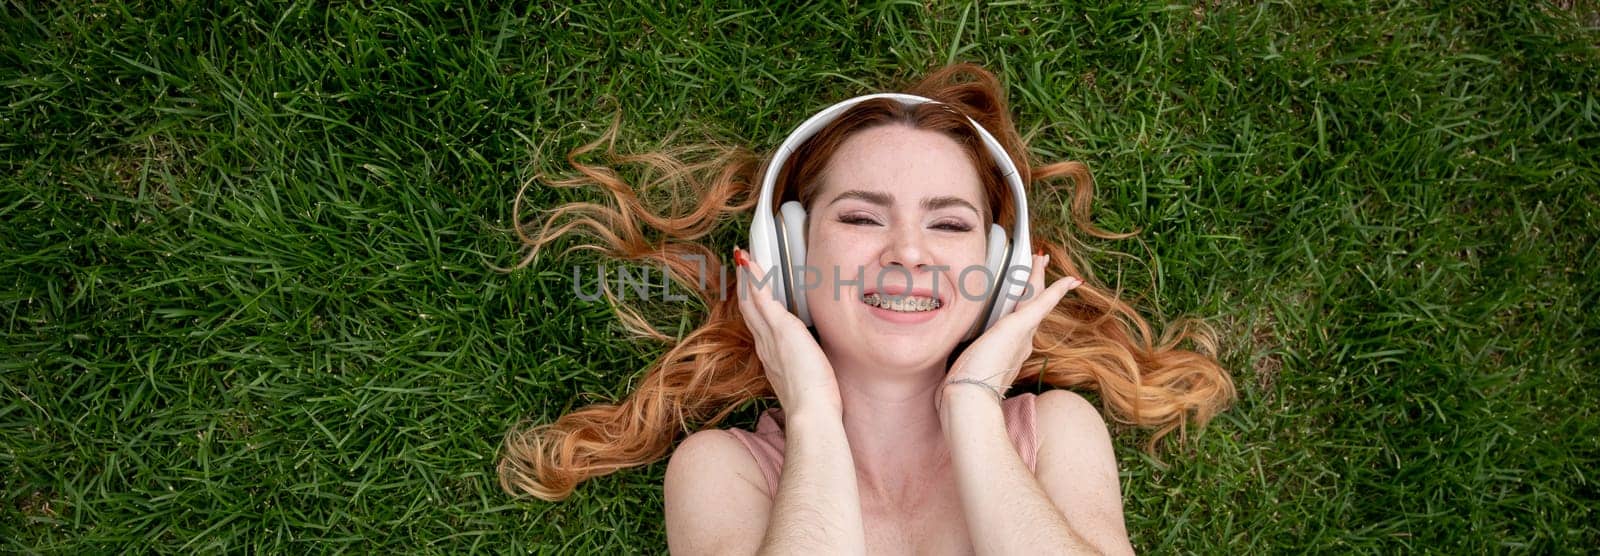 Top view of a young red-haired woman lying on the grass and listening to music on headphones. Widescreen